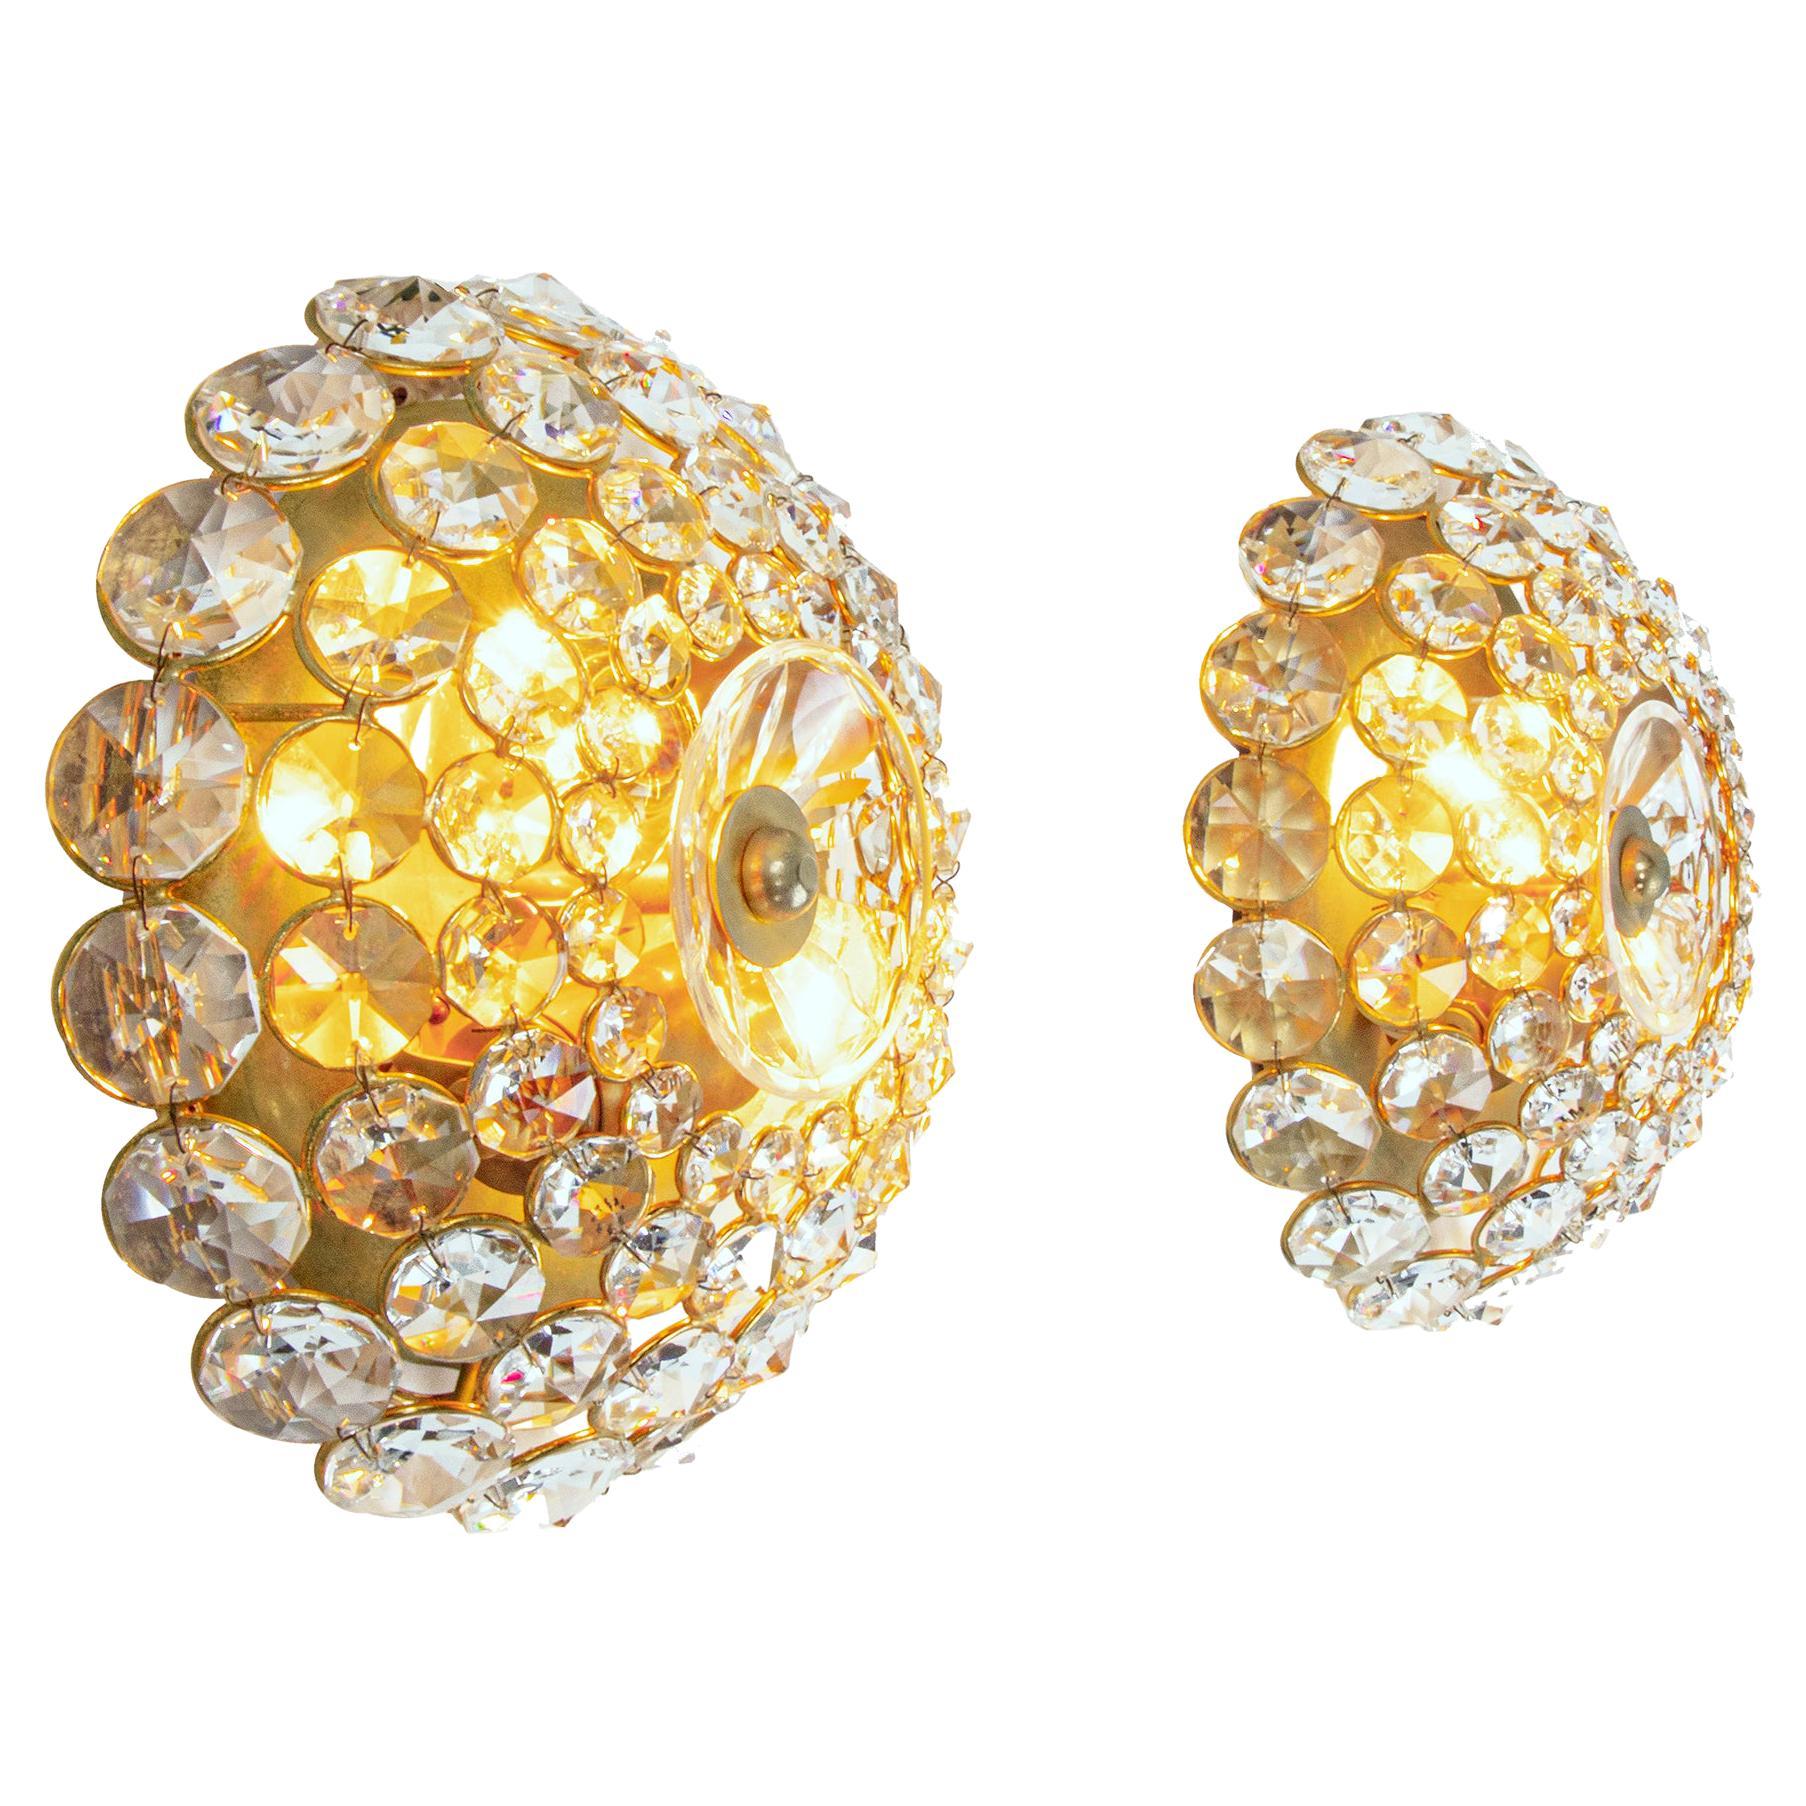 Pair of Gold-Plated Brass and Crystal Glass Wall Lamps Sconces by Palwa, 1960